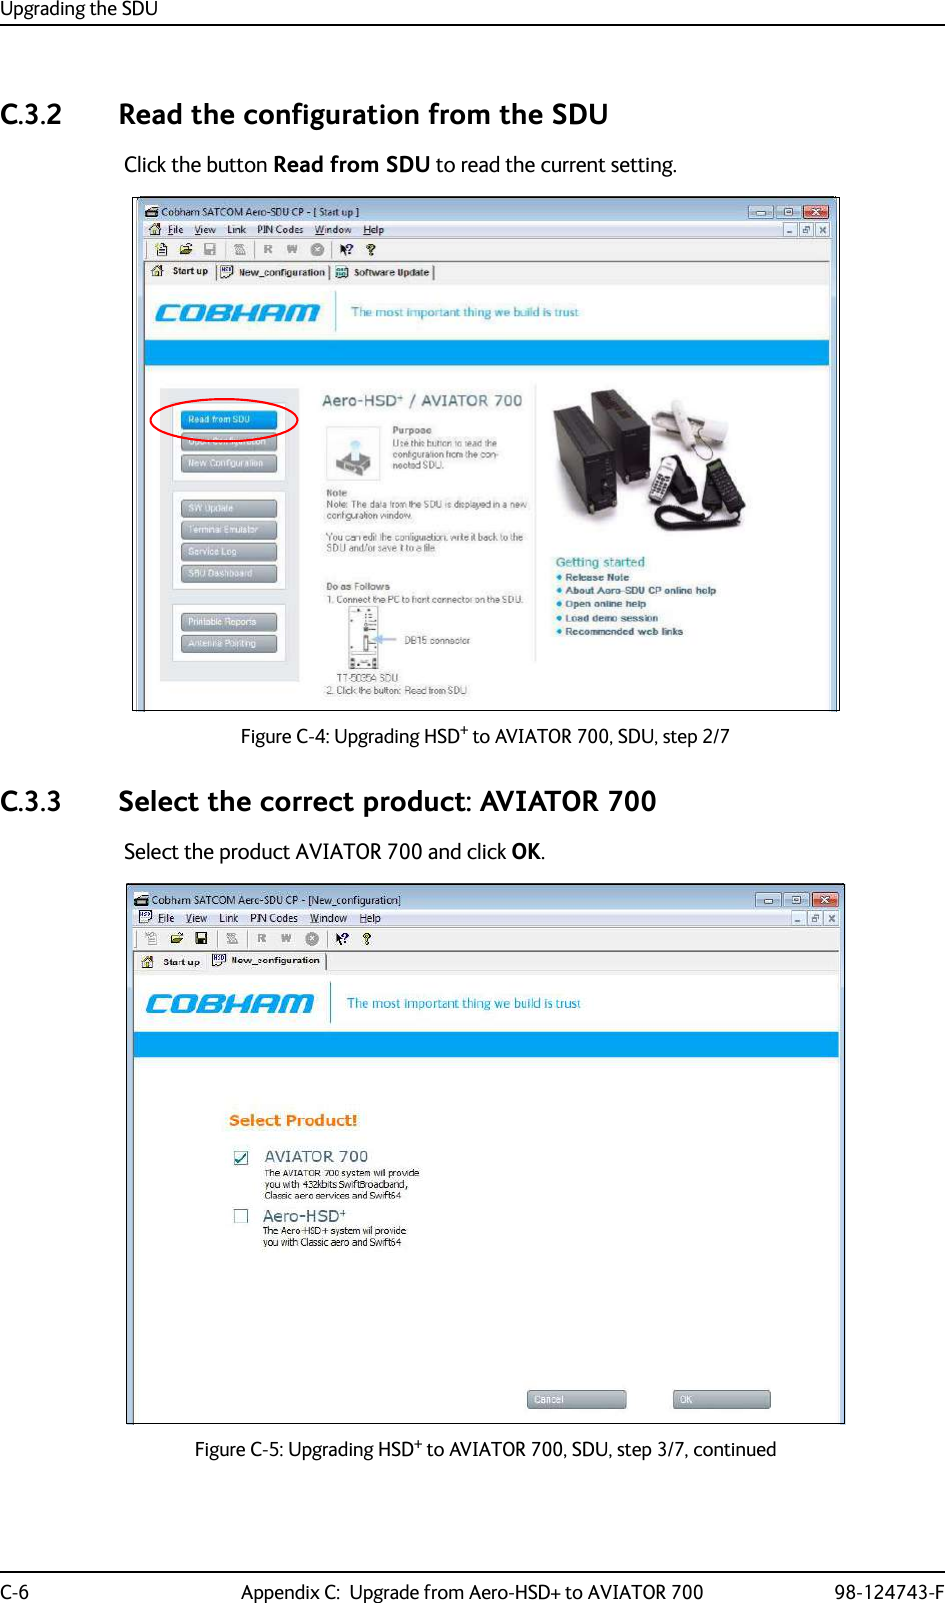 Upgrading the SDUC-6 Appendix C:  Upgrade from Aero-HSD+ to AVIATOR 700 98-124743-FC.3.2 Read the configuration from the SDUClick the button Read from SDU to read the current setting.Figure C-4: Upgrading HSD+ to AVIATOR 700, SDU, step 2/7C.3.3 Select the correct product: AVIATOR 700Select the product AVIATOR 700 and click OK.Figure C-5: Upgrading HSD+ to AVIATOR 700, SDU, step 3/7, continued